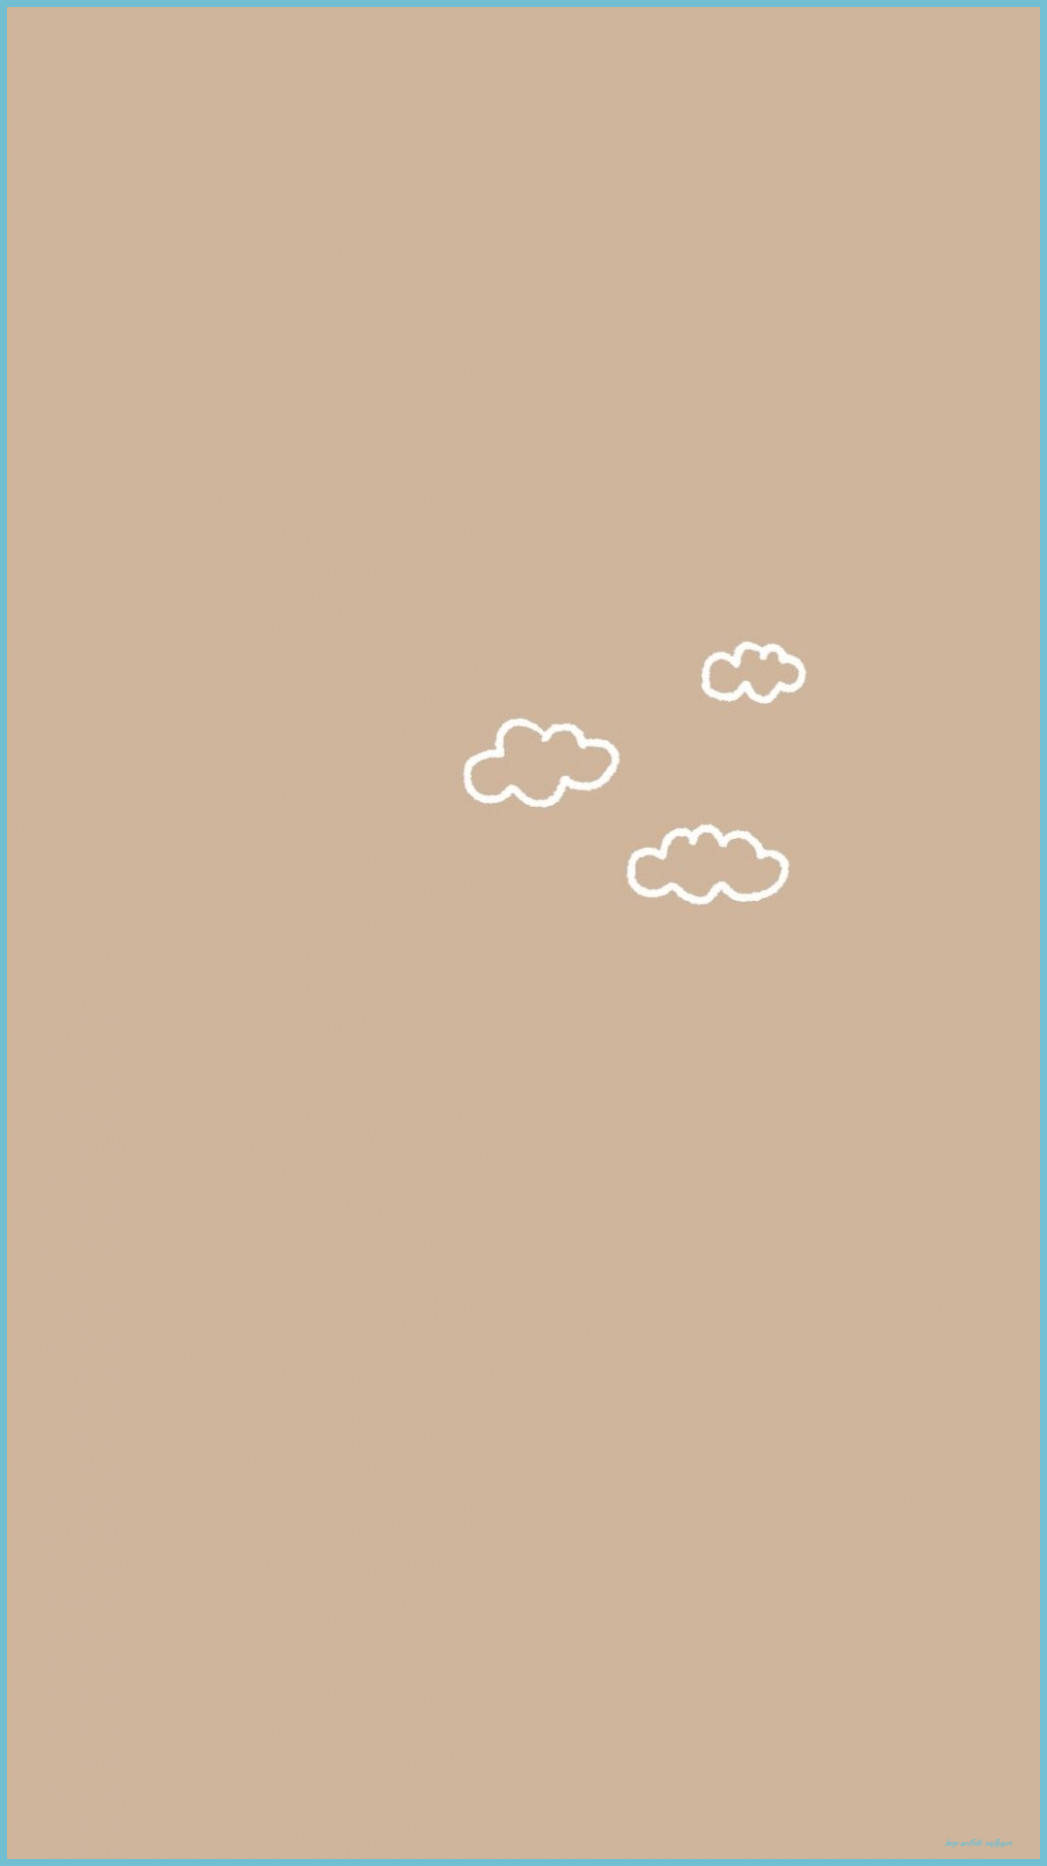 White Clouds On Beige Brown Aesthetic